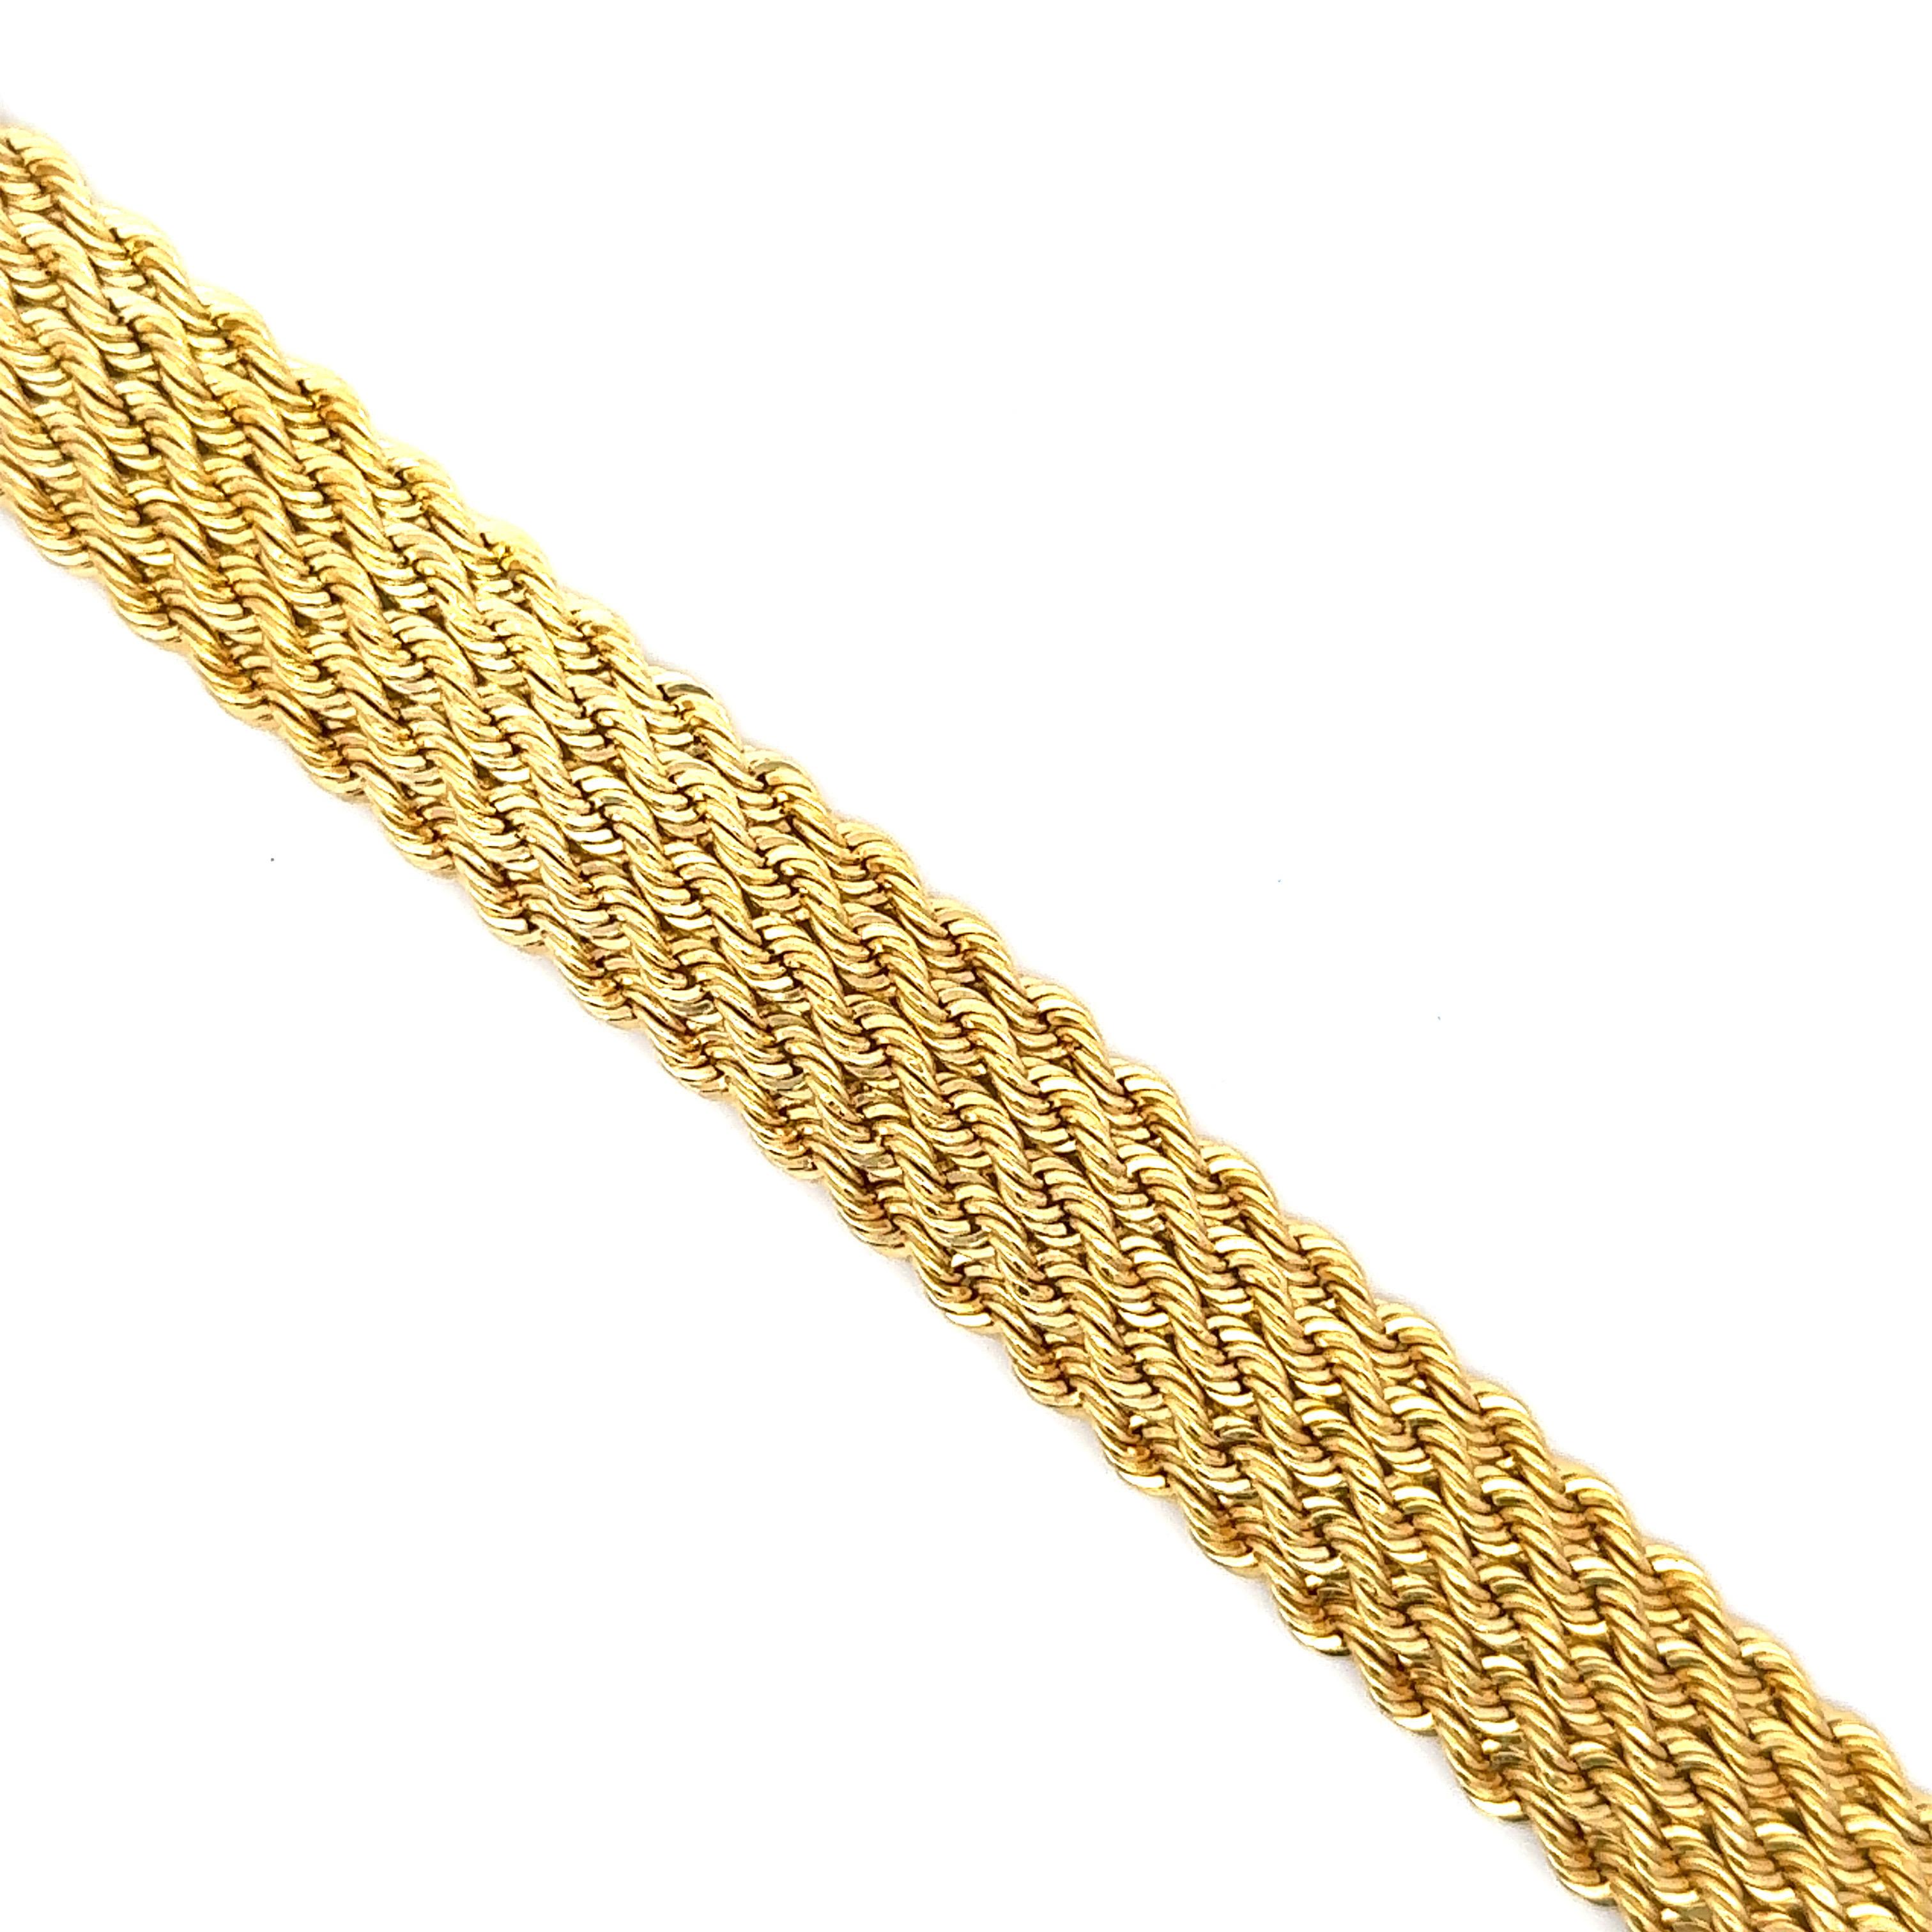 14 Karat Yellow Gold bracelet featuring a braided twist motif weighing 21.1 grams. 
More link bracelets in stock
Search Harbor Diamonds